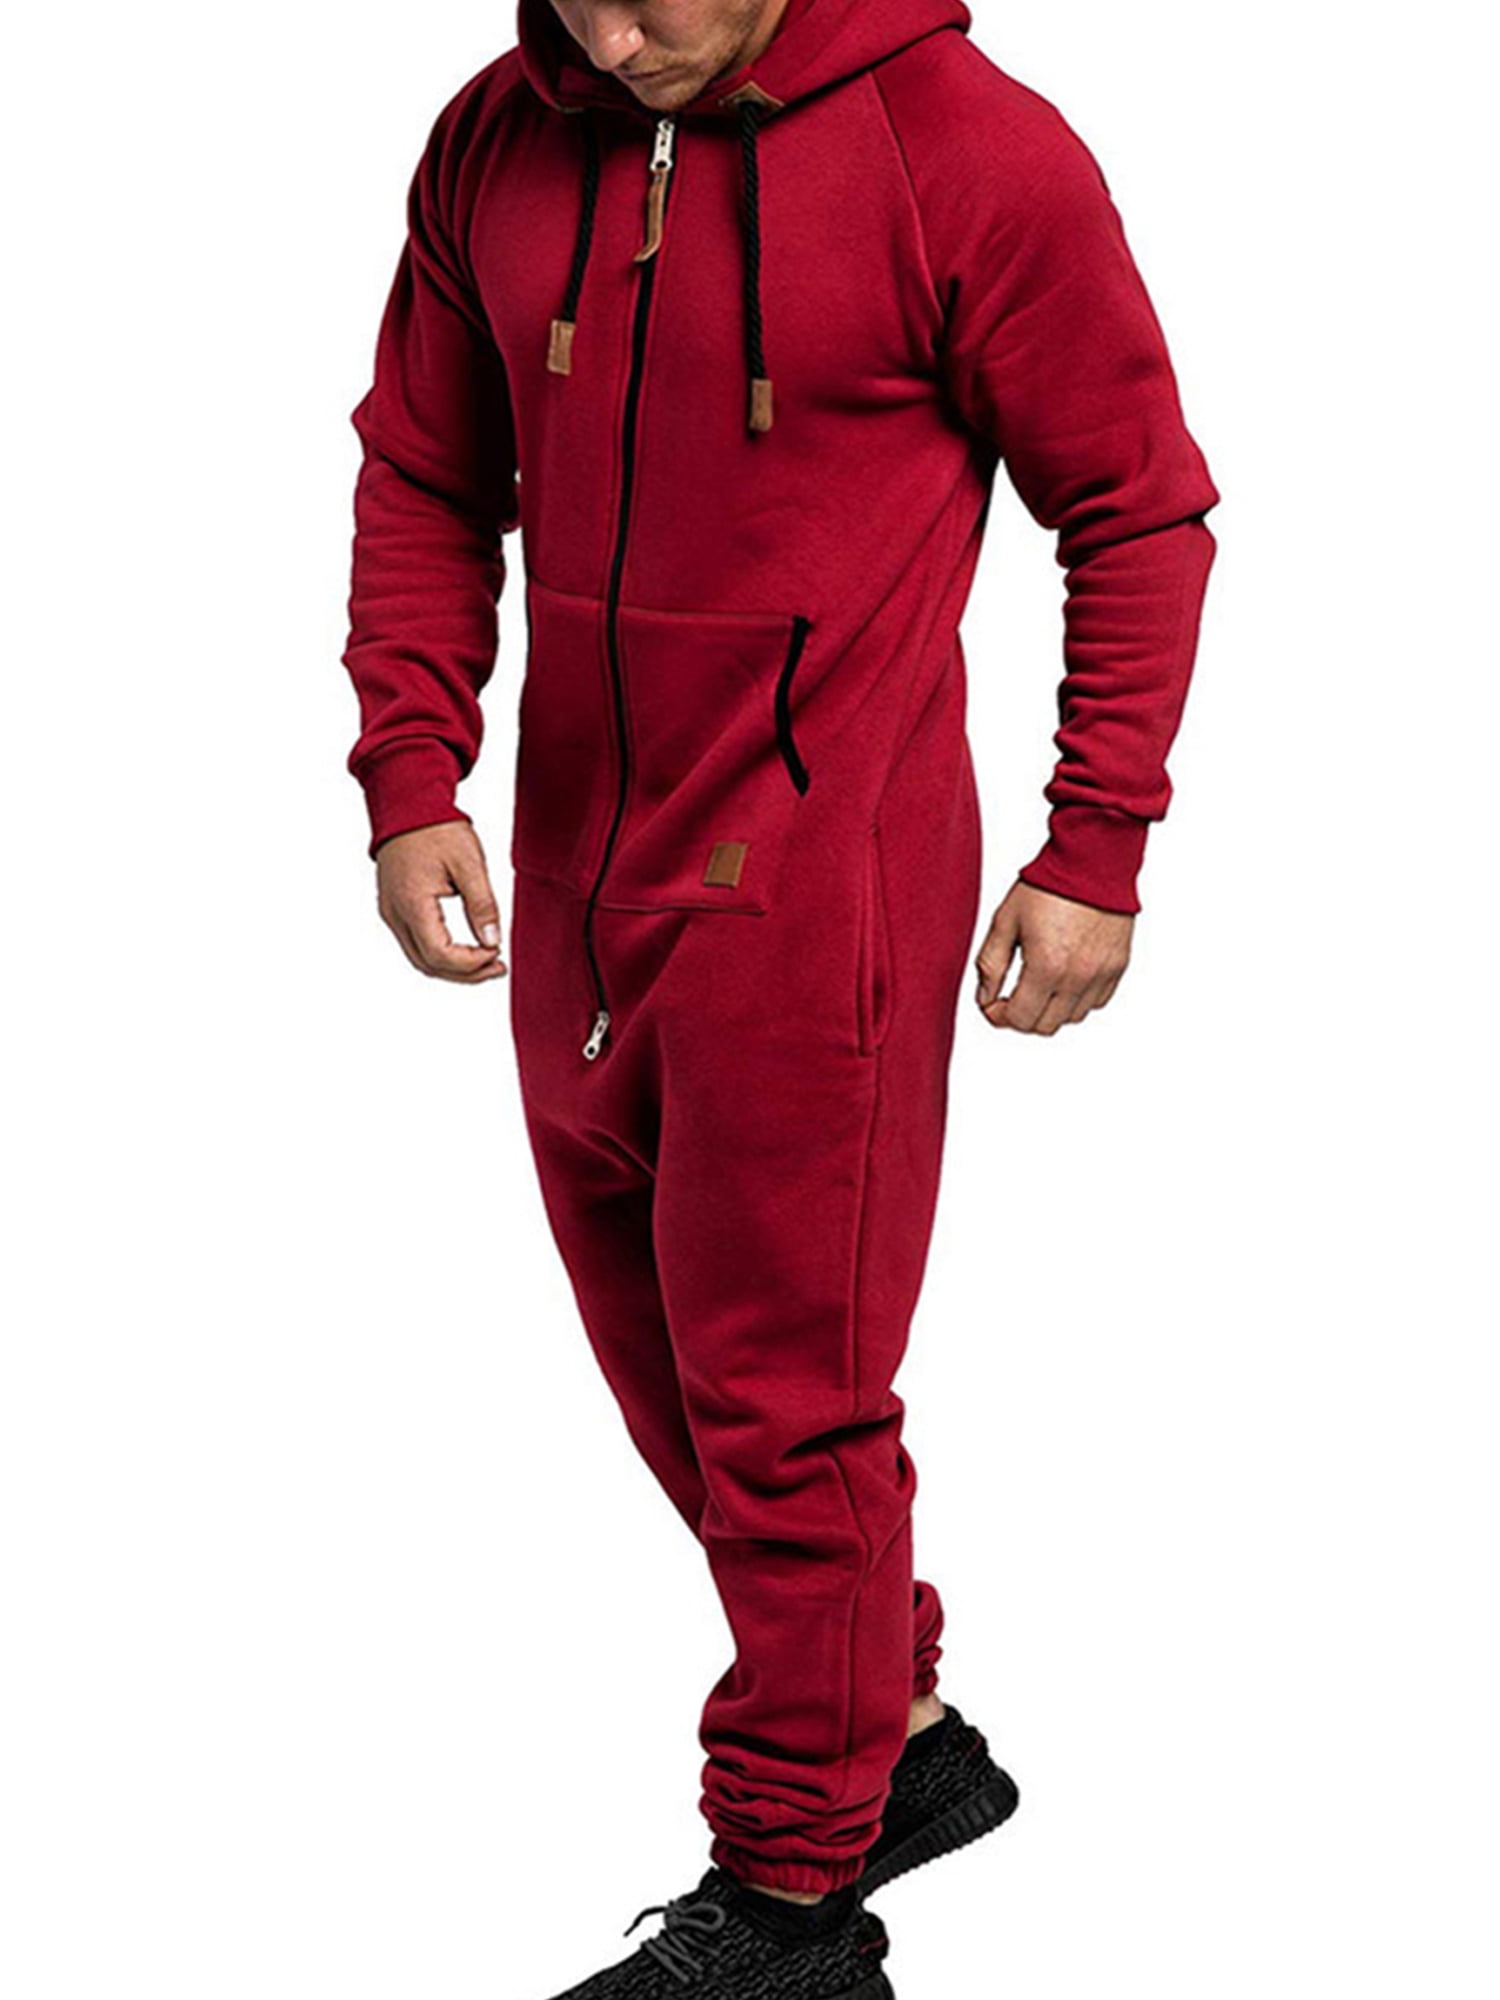 Money Thief Hooded Red Jumpsuit Adult Size - Cappel's